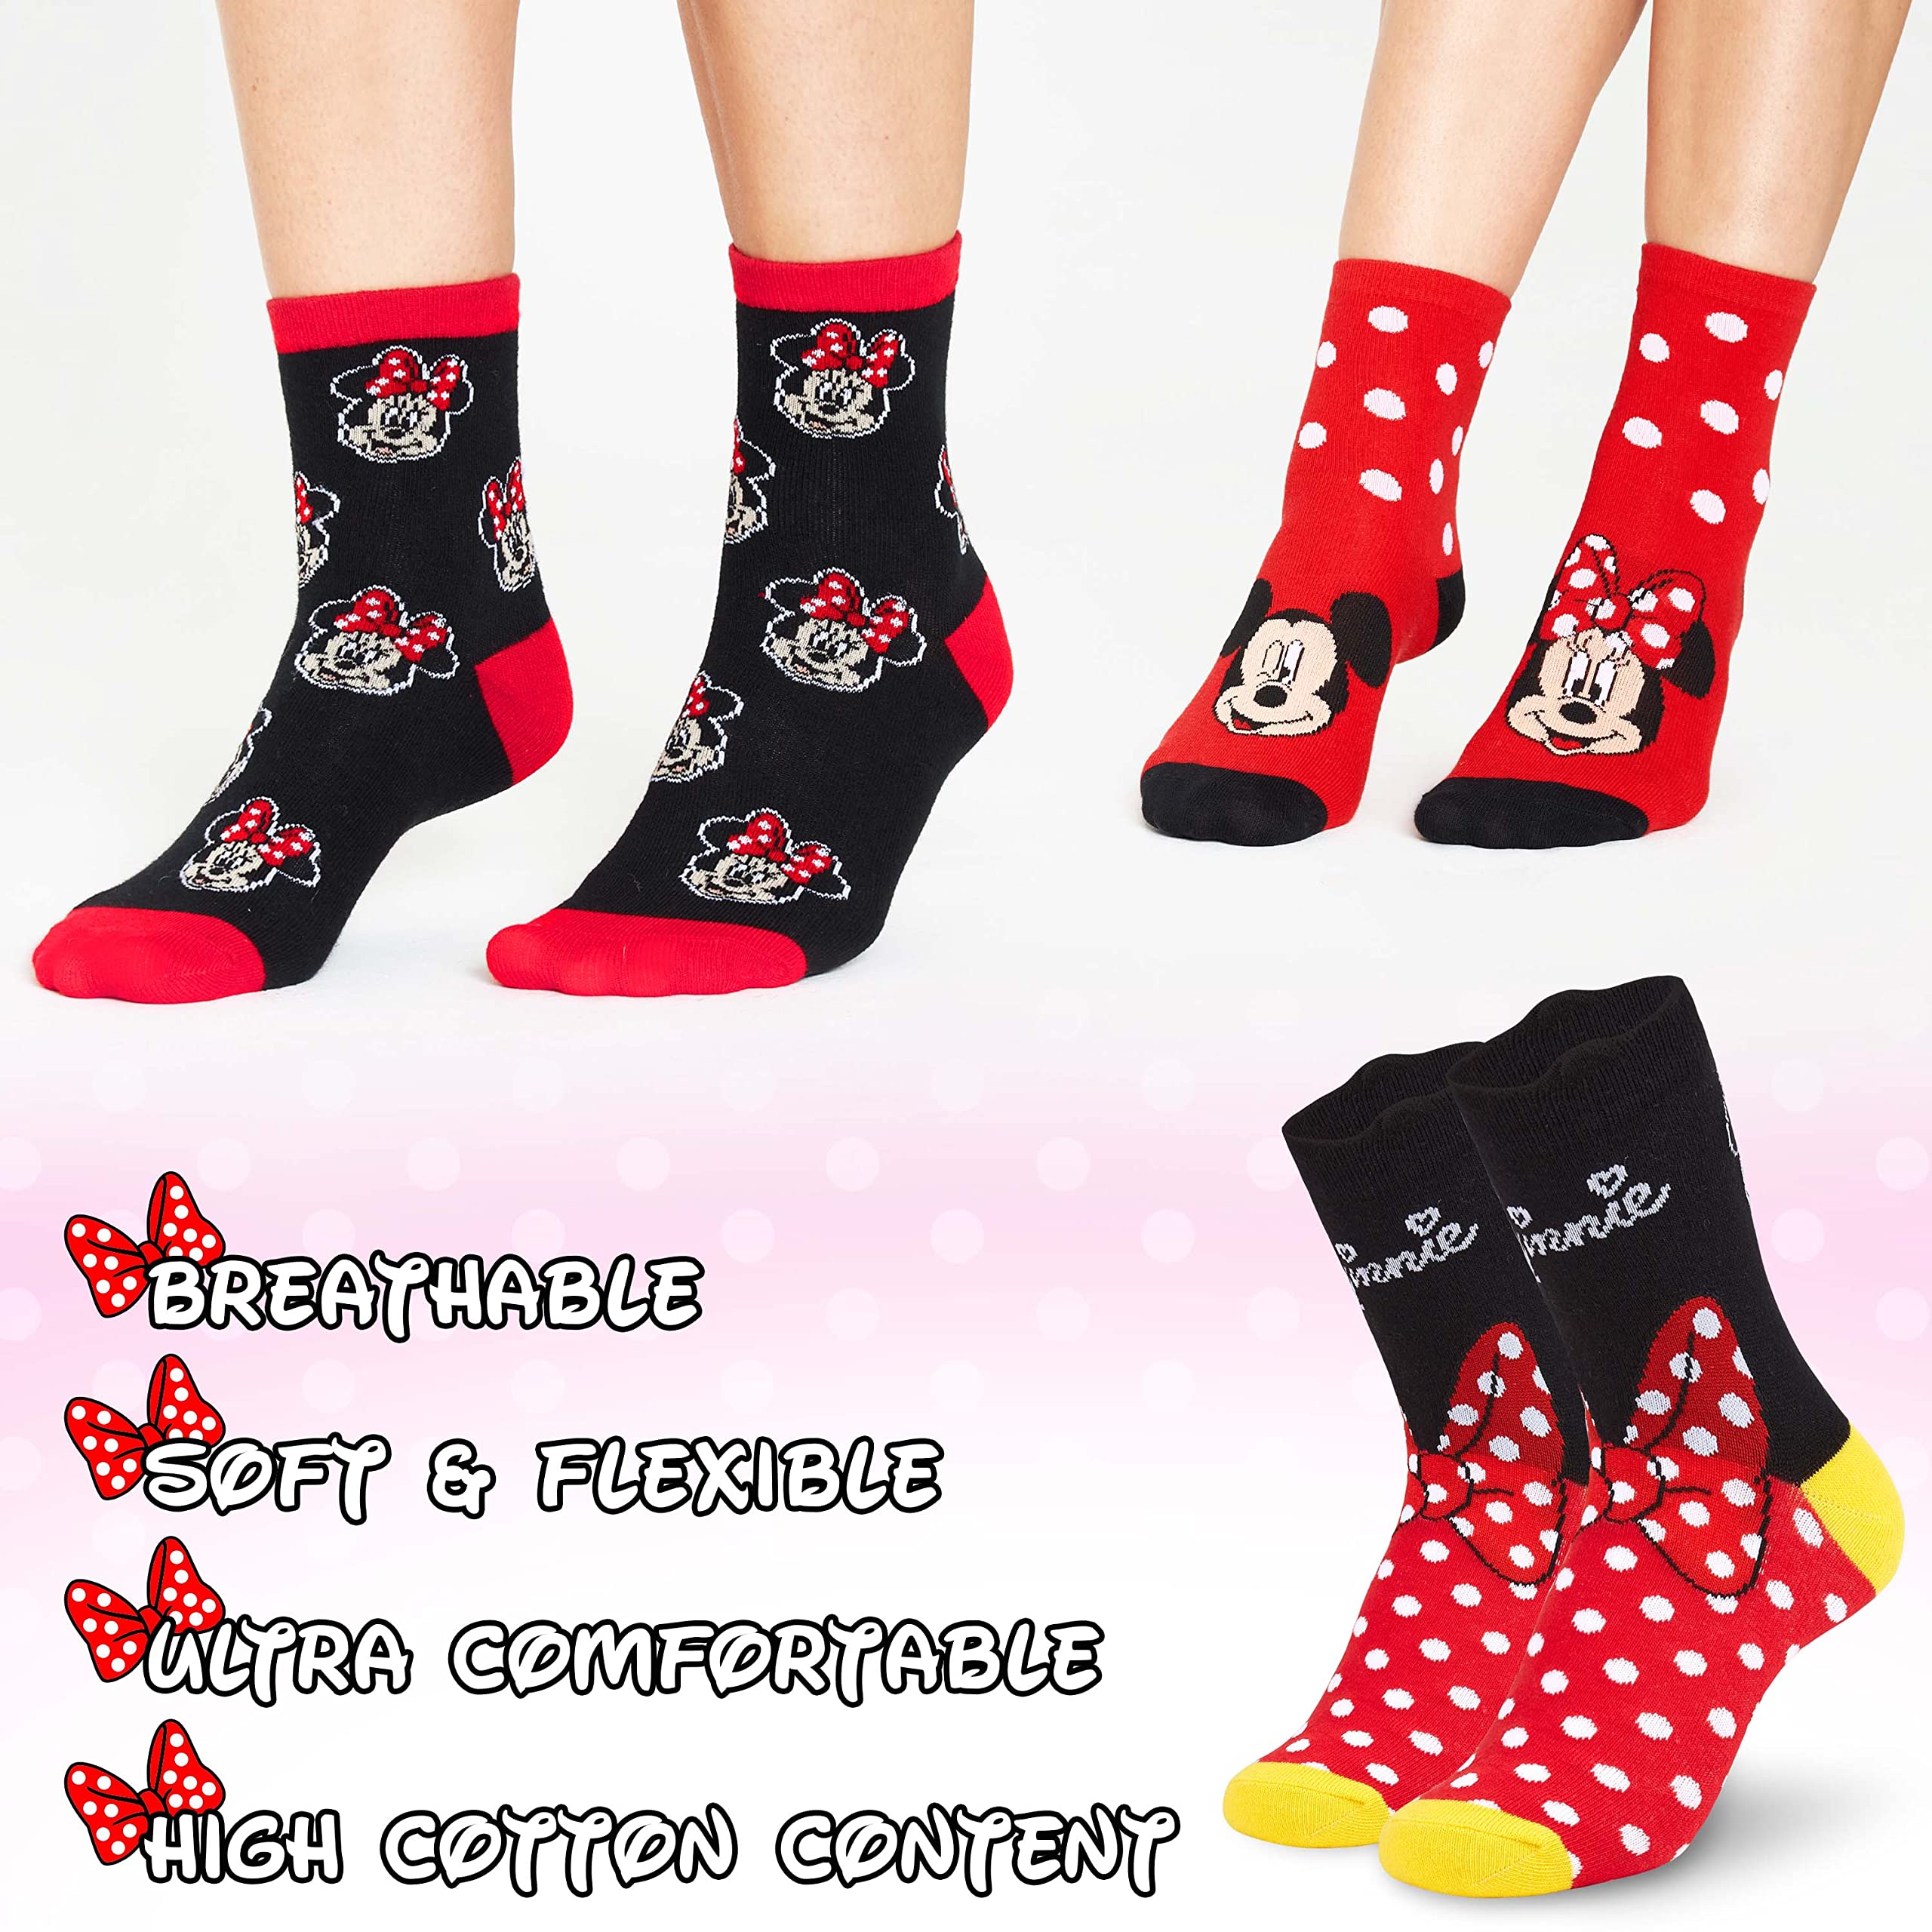 Disney Womens Calf Socks, Soft Stretchy Socks in Pack of 5 - Gifts for Women (Red/Black)